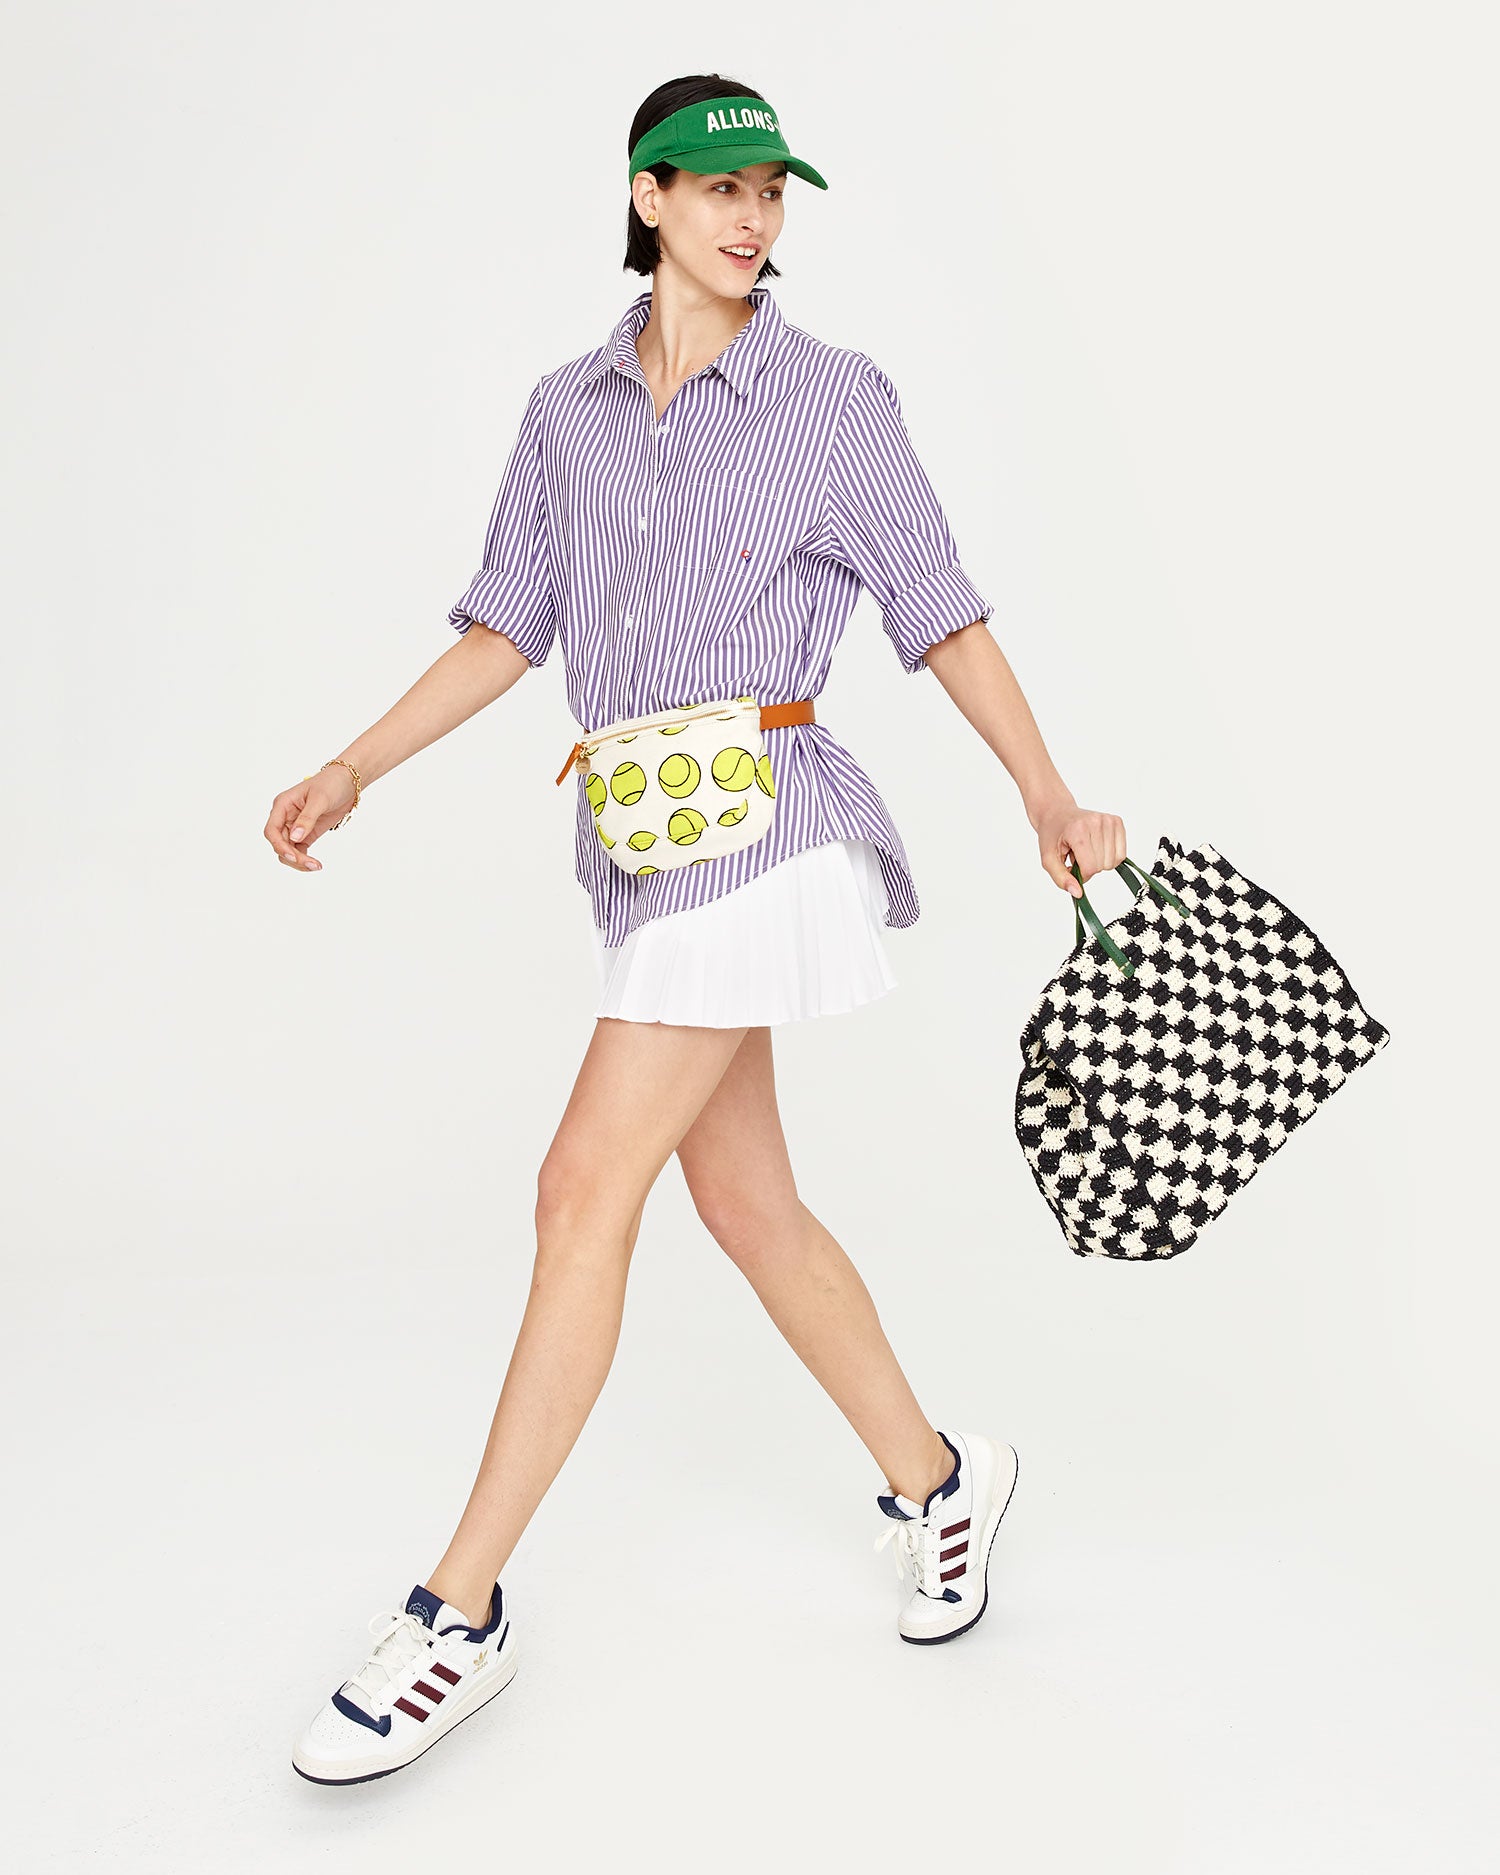 athena wearing the Natural with Tennis Balls Fanny Pack around her waist. she is also carrying the black and cream checker summer simple tote